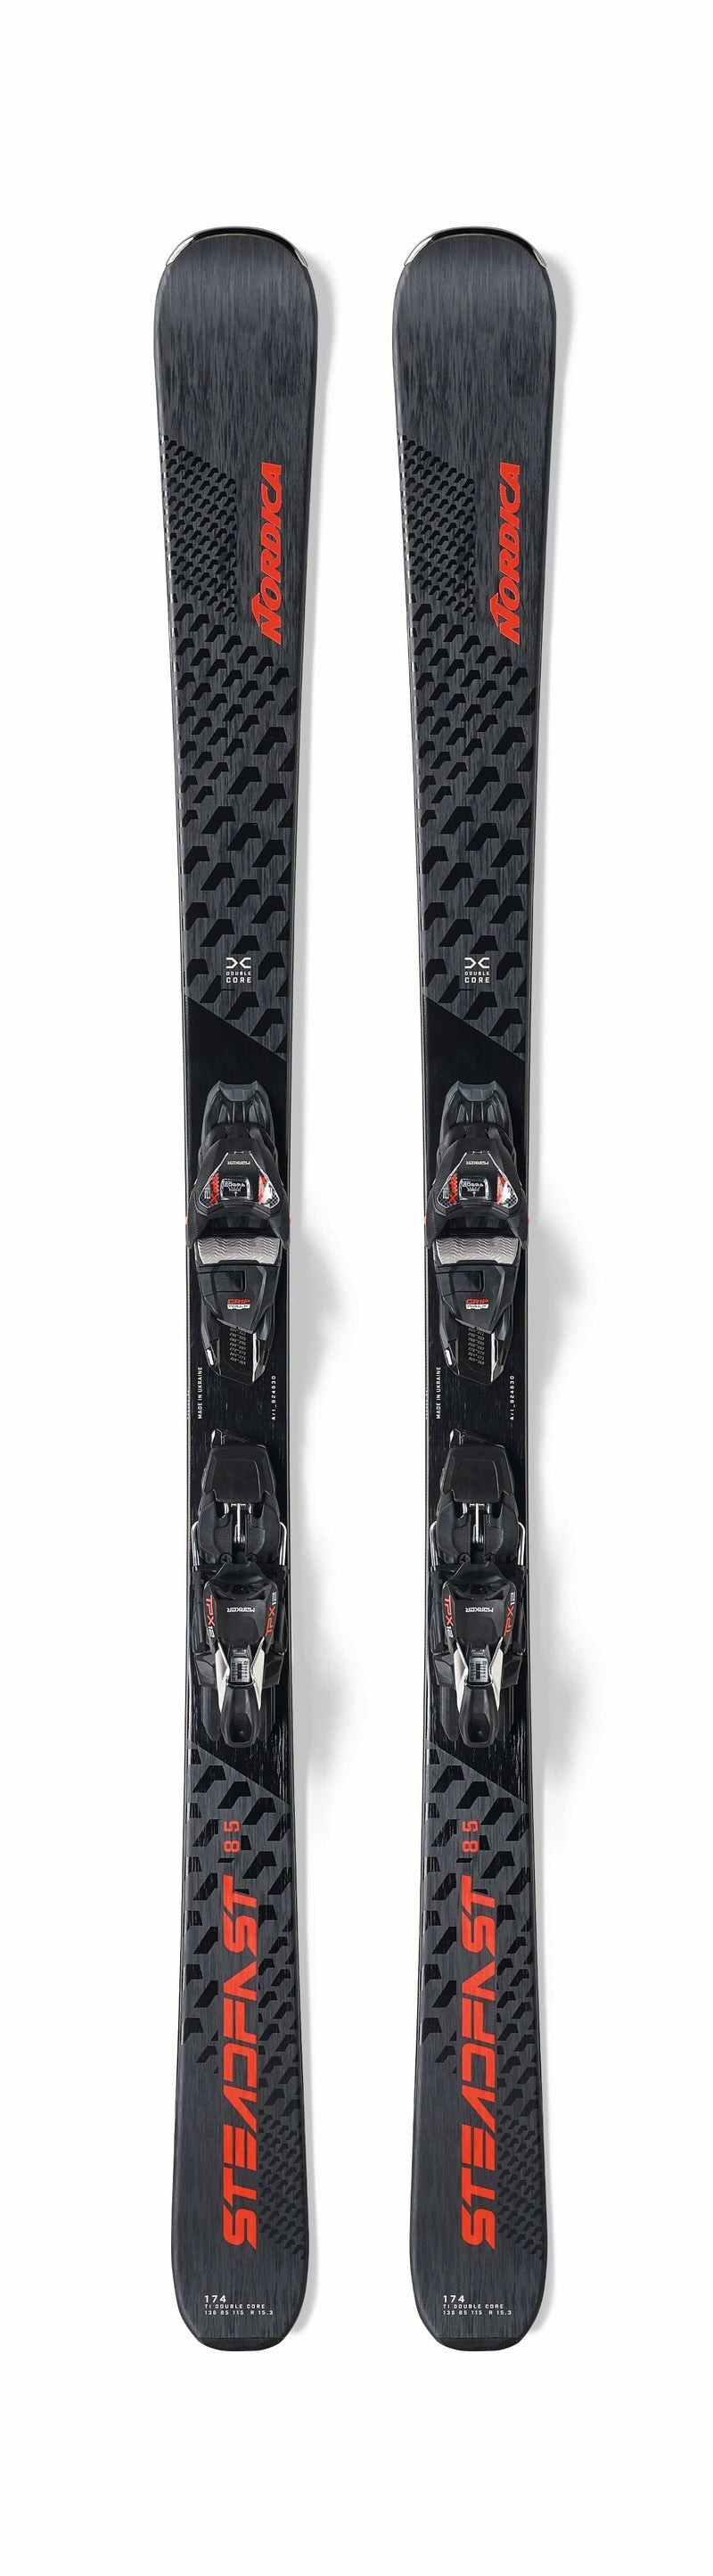 Nordica Men's Steadfast 85 DC FDT Skis with TPX 12 Bindings